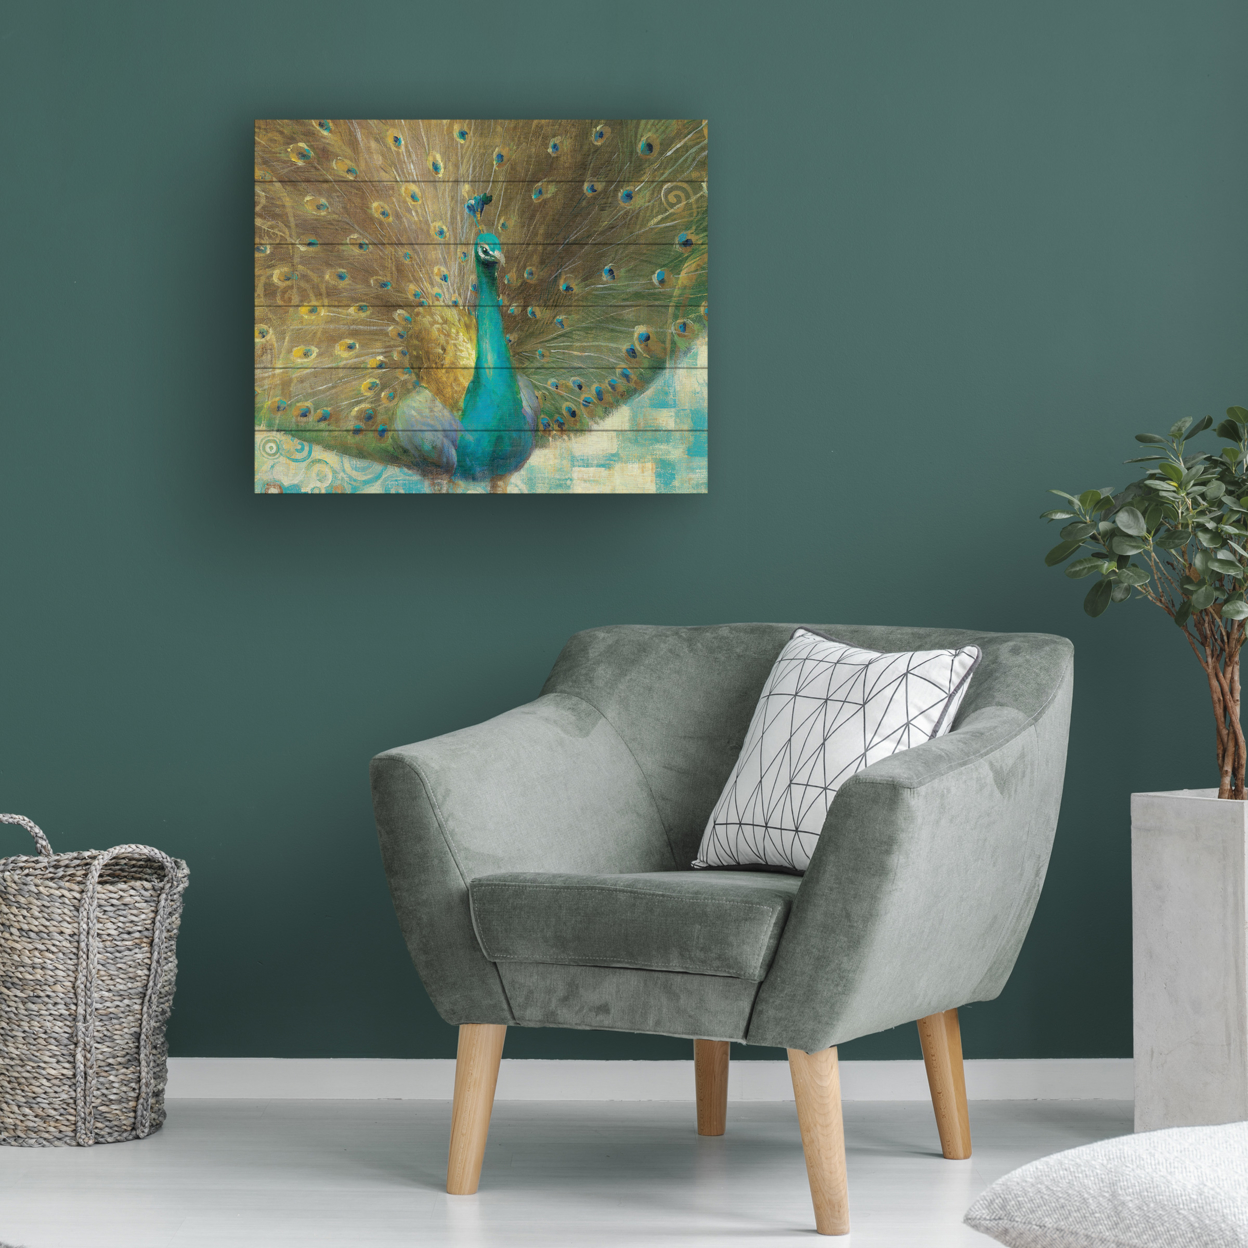 Wooden Slat Art 18 X 22 Inches Titled Teal Peacock On Gold Ready To Hang Home Decor Picture